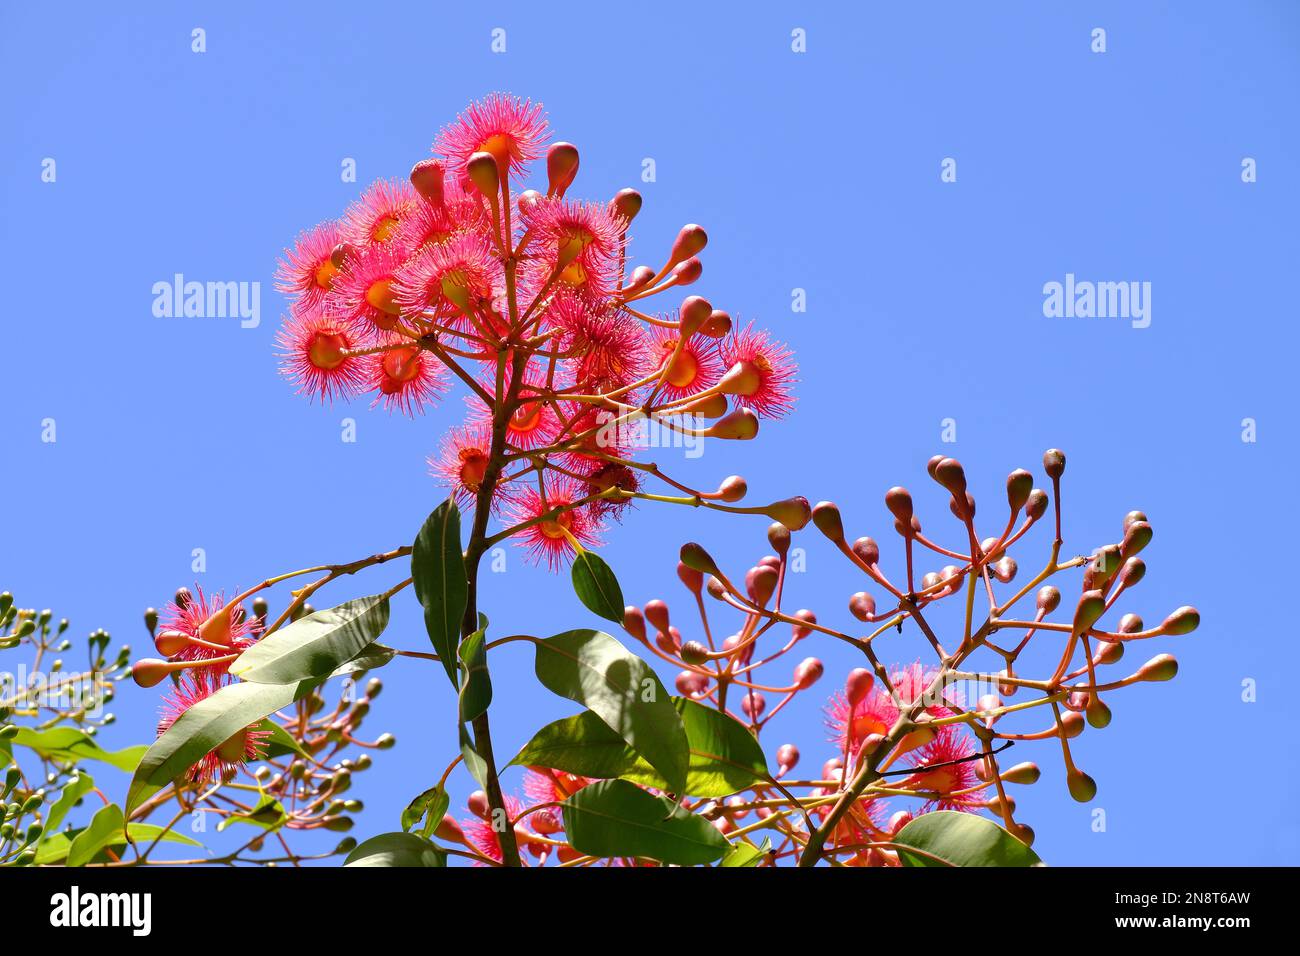 Crimson pink flowering gum (Eucalyptus) flowers, buds and leaves on the tree against a blue sky in Perth, Western Australia Stock Photo